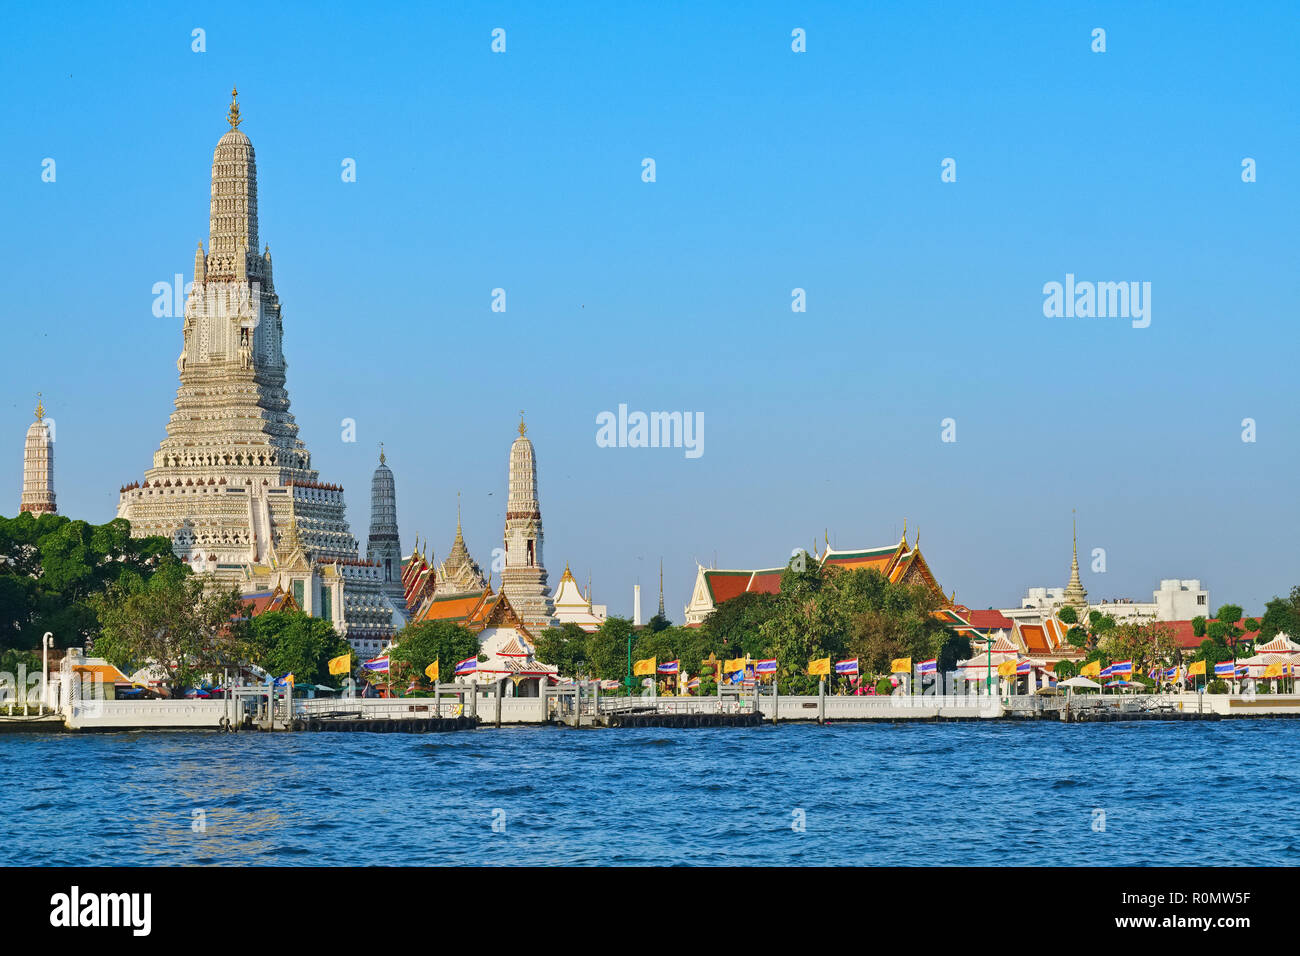 Wat Arun or Temple of Dawn, seen from the opposite bank of the Chao Phraya River, the so-called River of Kings, Bangkok, Thailand Stock Photo